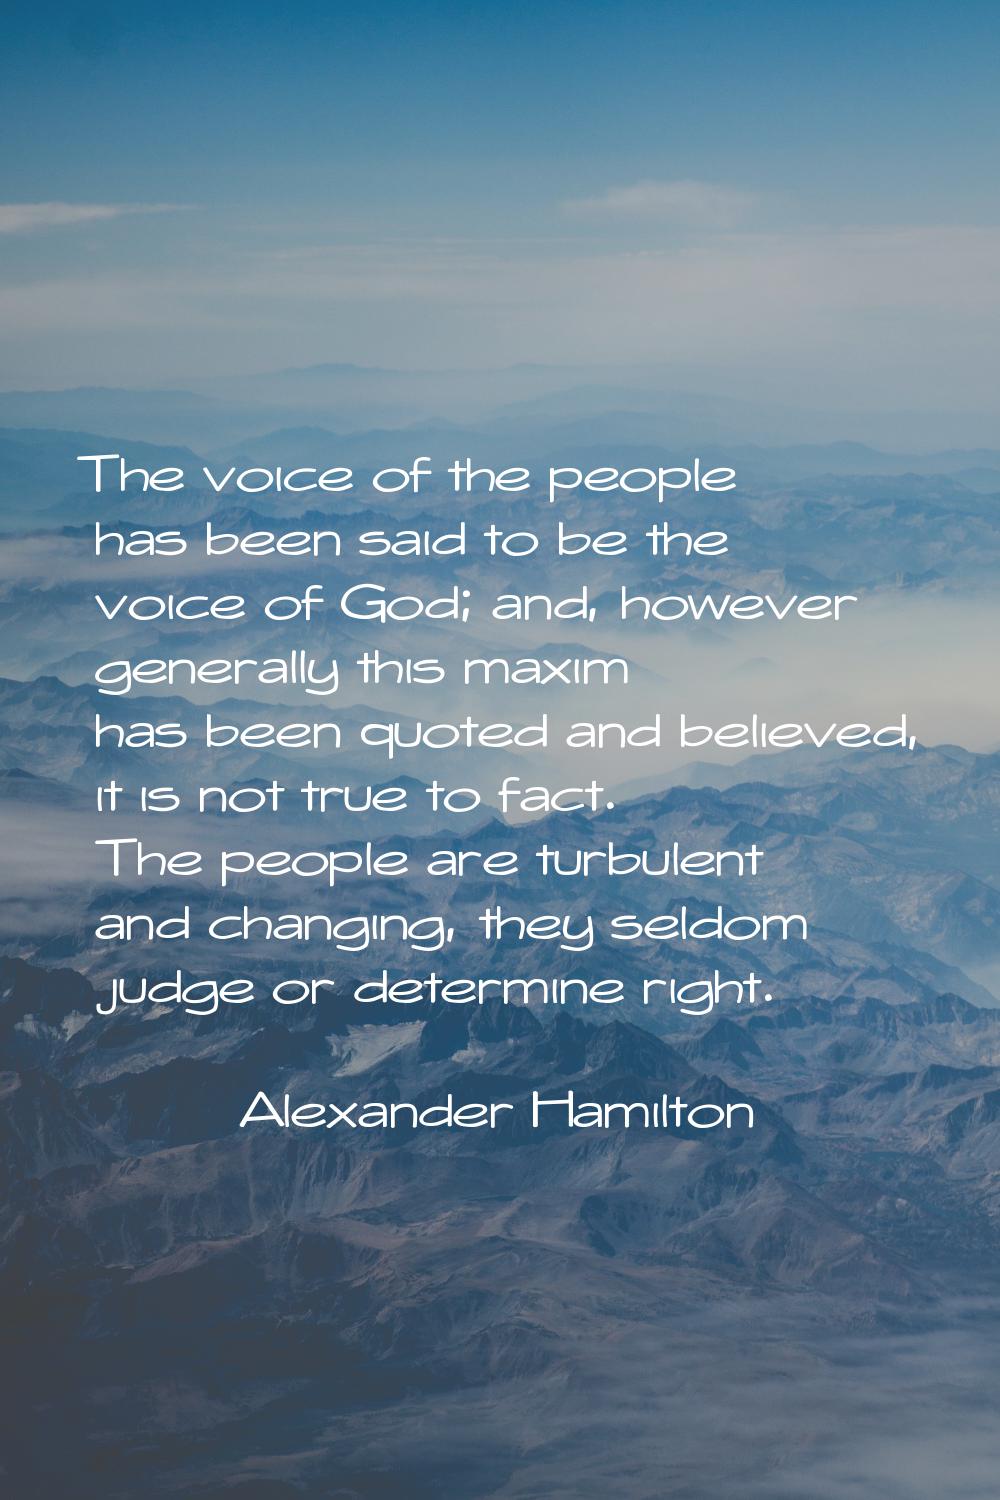 The voice of the people has been said to be the voice of God; and, however generally this maxim has